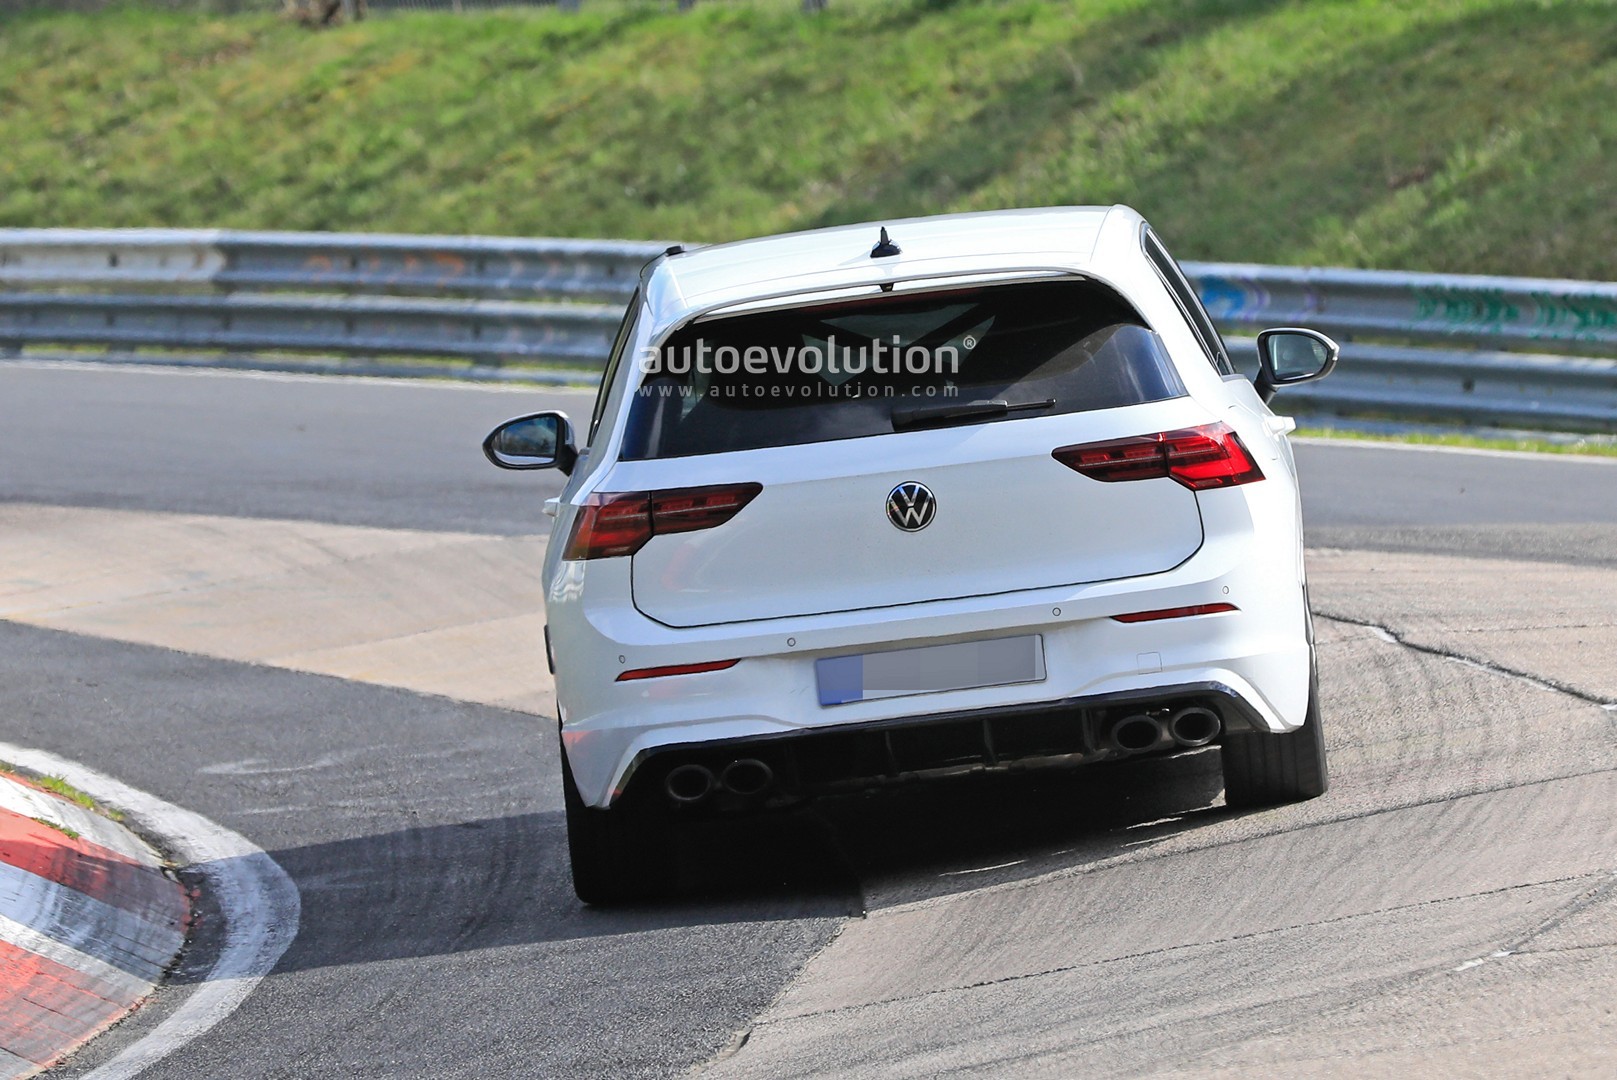 2021 VW Golf 8 Variant (110hp) - Sound & Visual Review! 